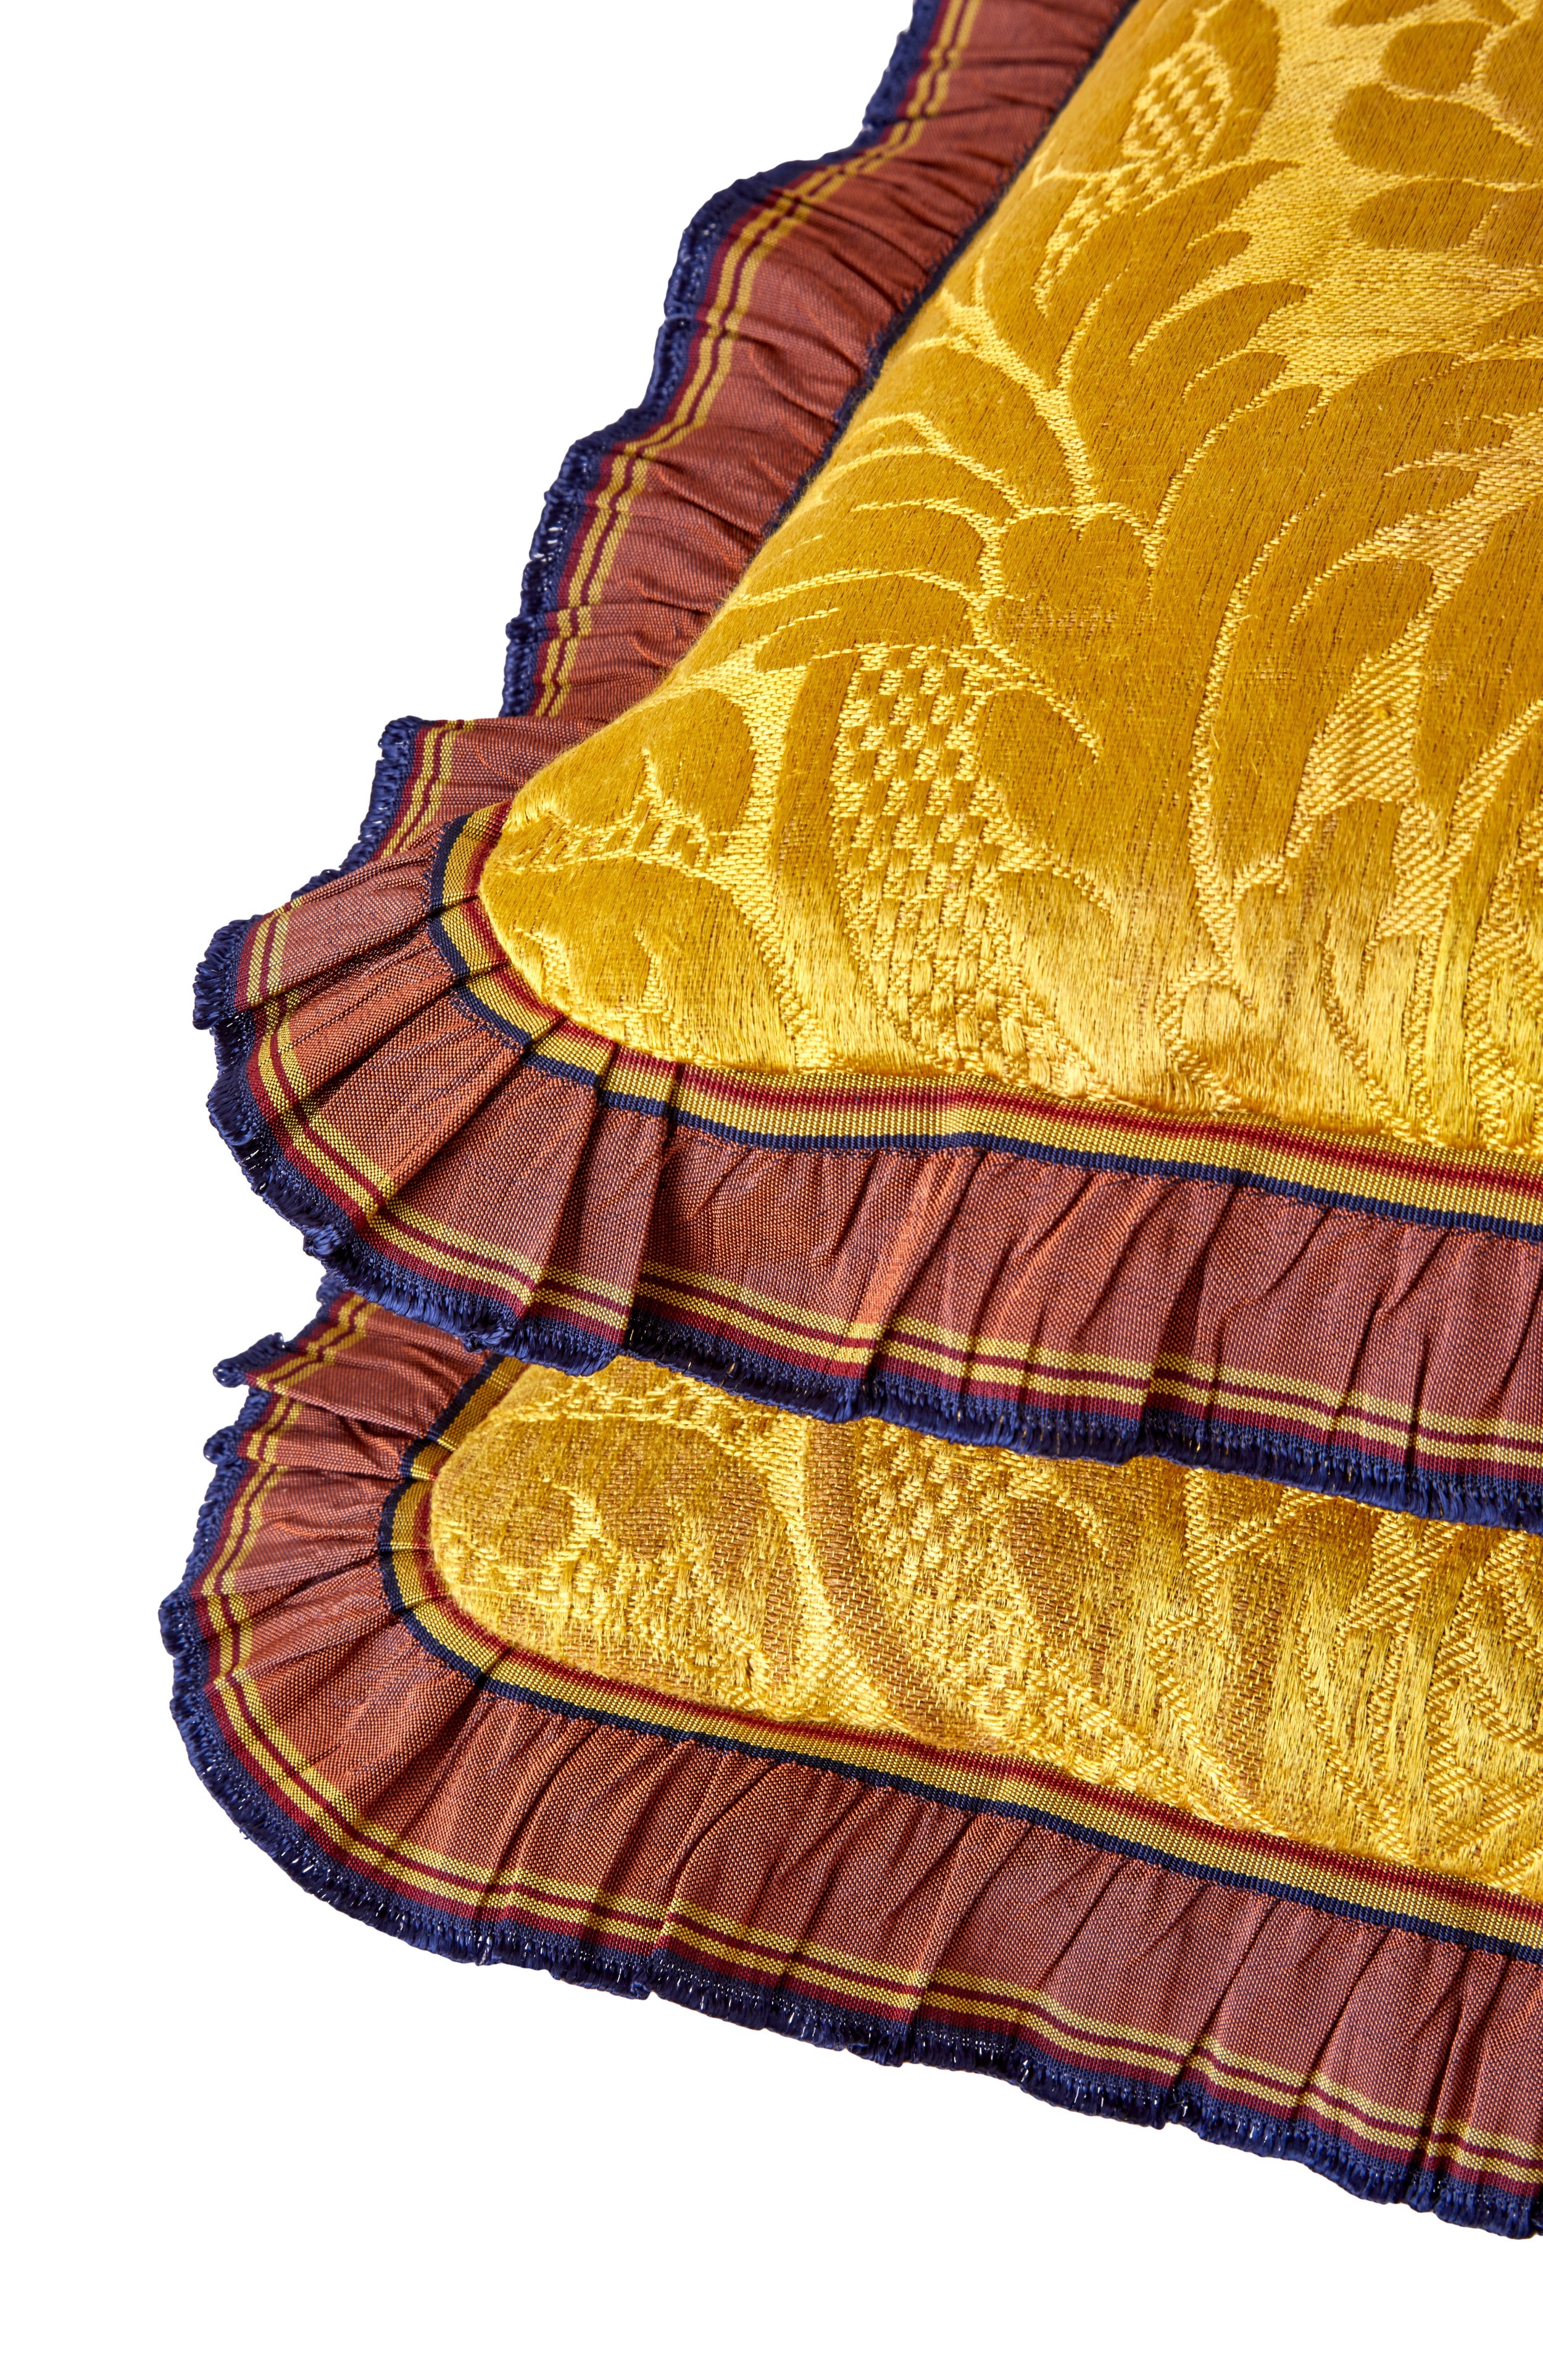 A Pair of Cushions made from 18th Century Gold Italian Silk Damask with an Antique French Grosgrain Ruffle Trim